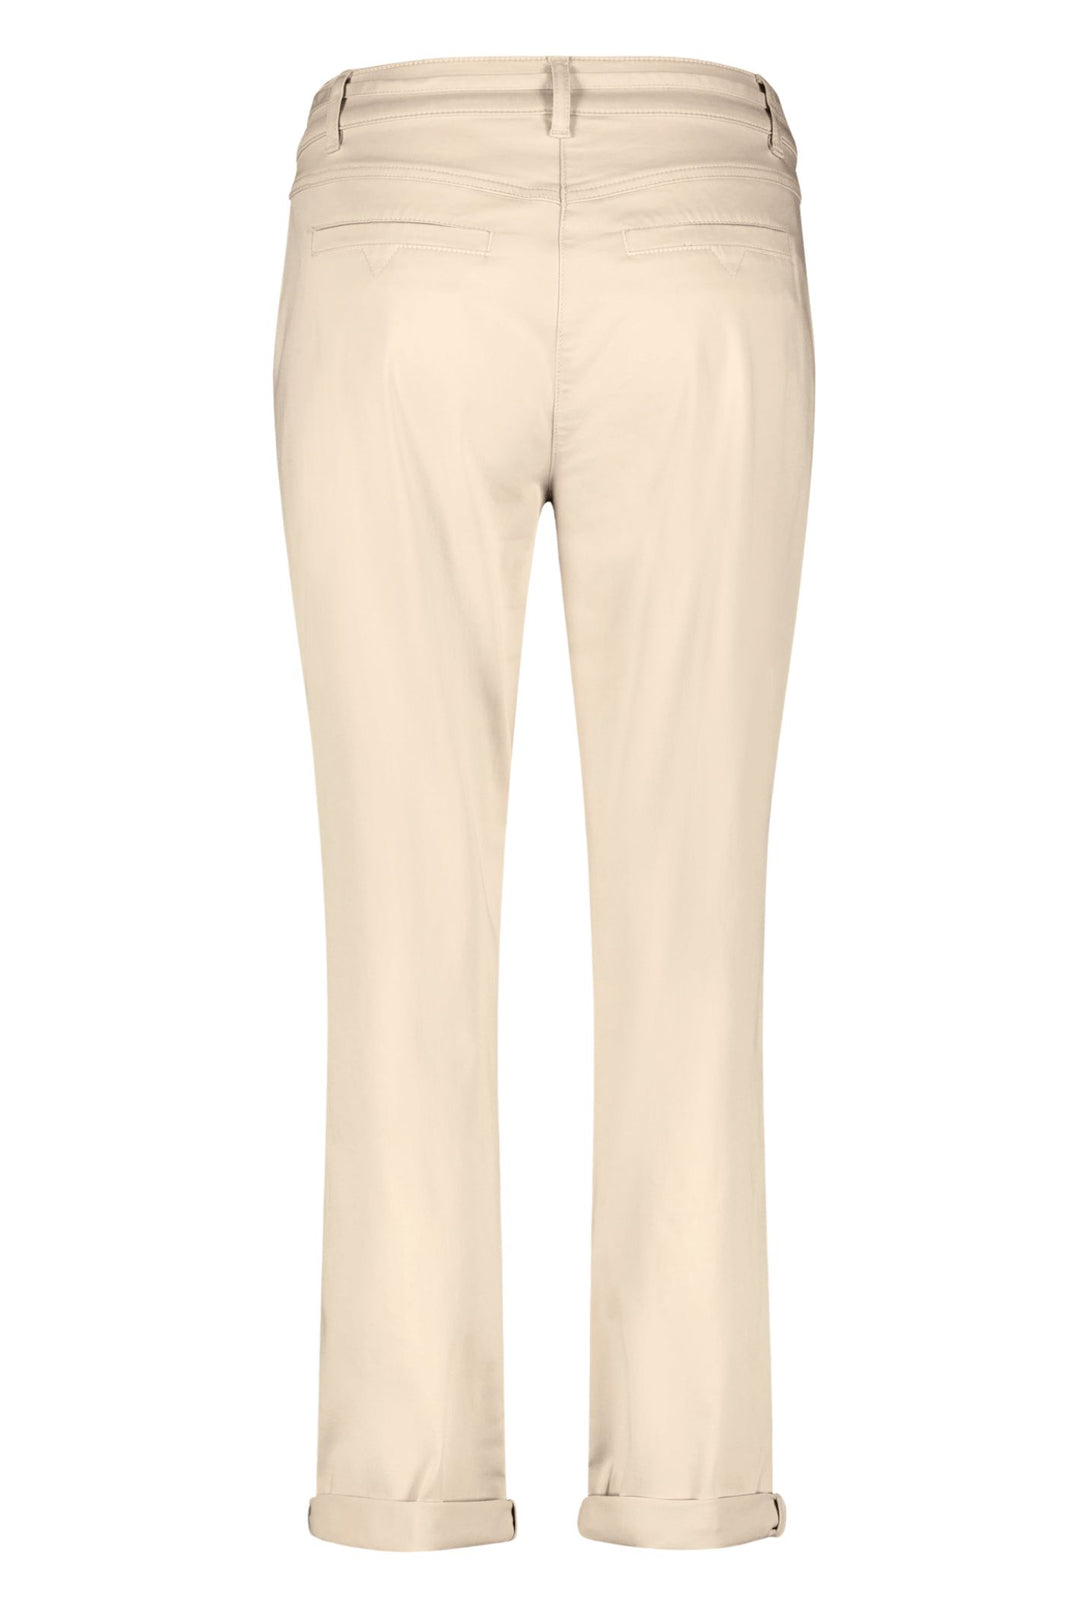 Gerry Weber 925045 Nomand Taupe Kes:sy Chino